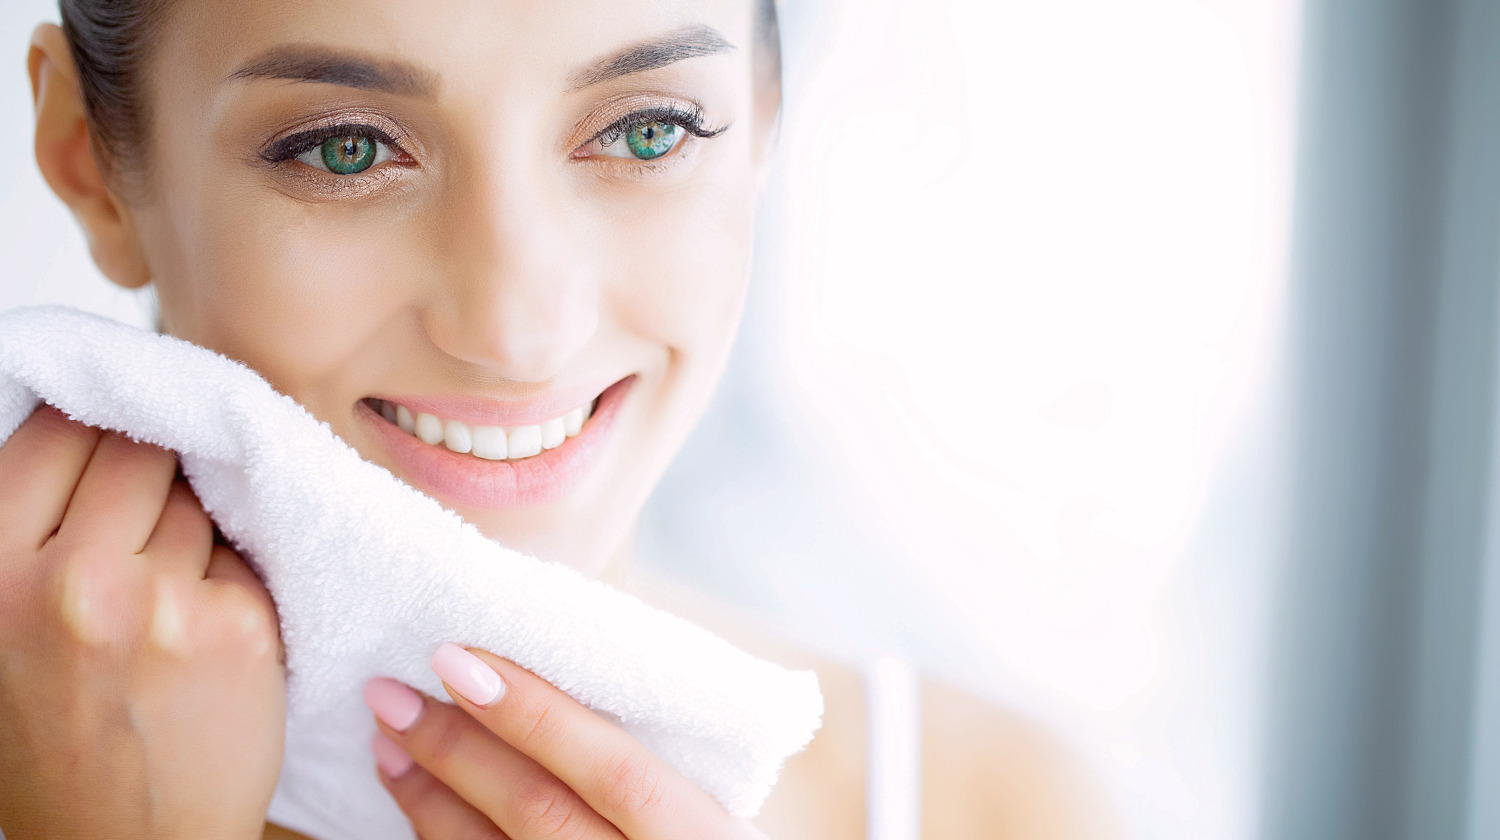 Featured | Beautiful Young Girl with White Teeth Holding a White Towel in Hands | Face Towel Vs Hand Towel: When To Use Which? | Hand Towels